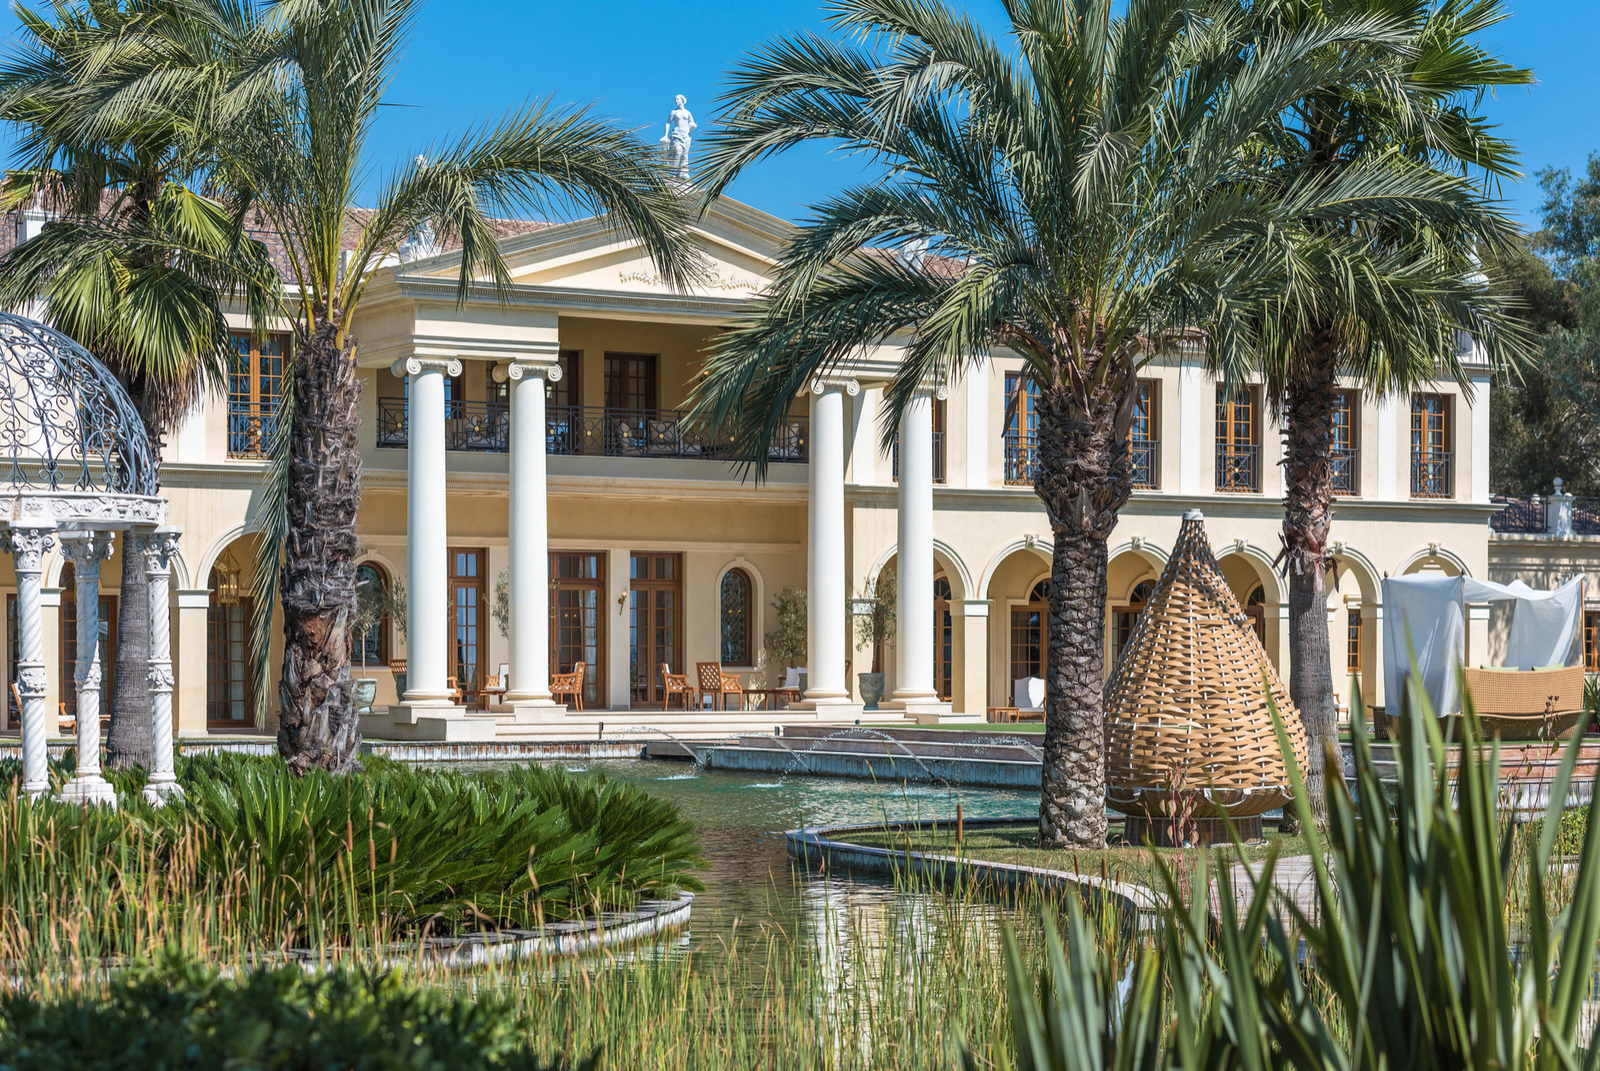 The Most Prestigious French Riviera Palace for sale in Cannes France